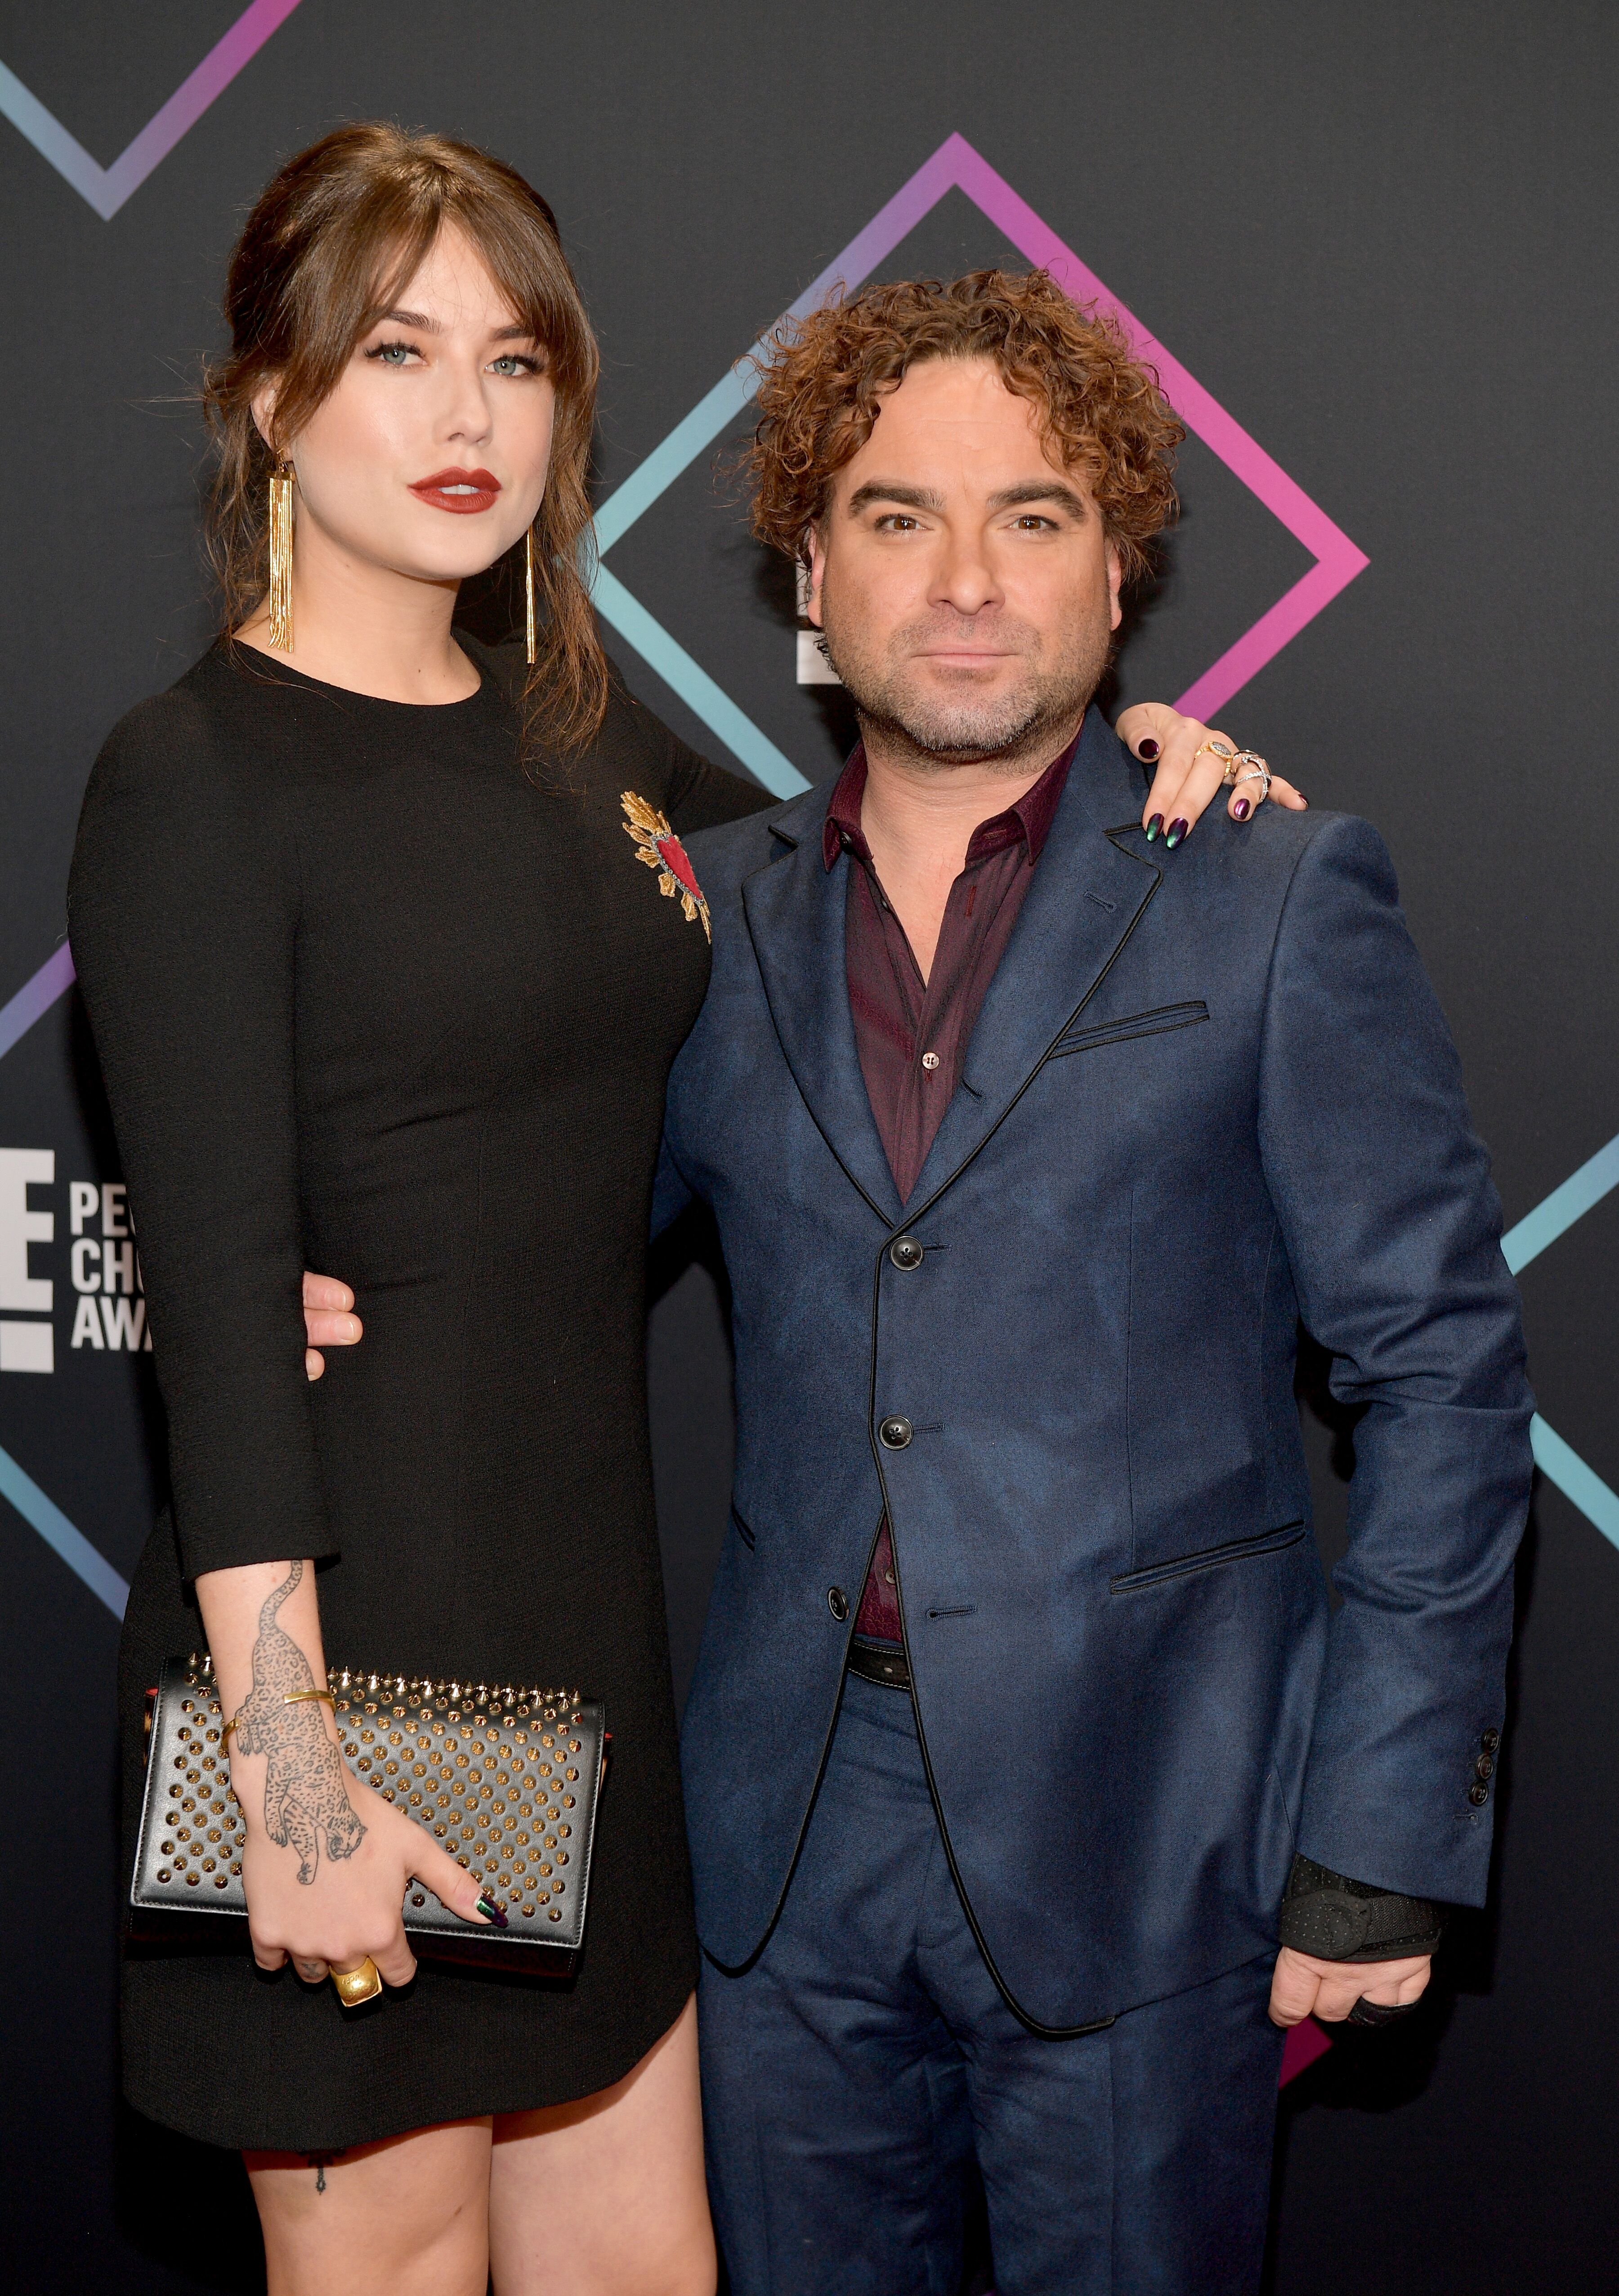 Alaina Meyer and Johnny Galecki at 2018 E! People's Choice Awards on November 11, 2018. | Source: Getty Images